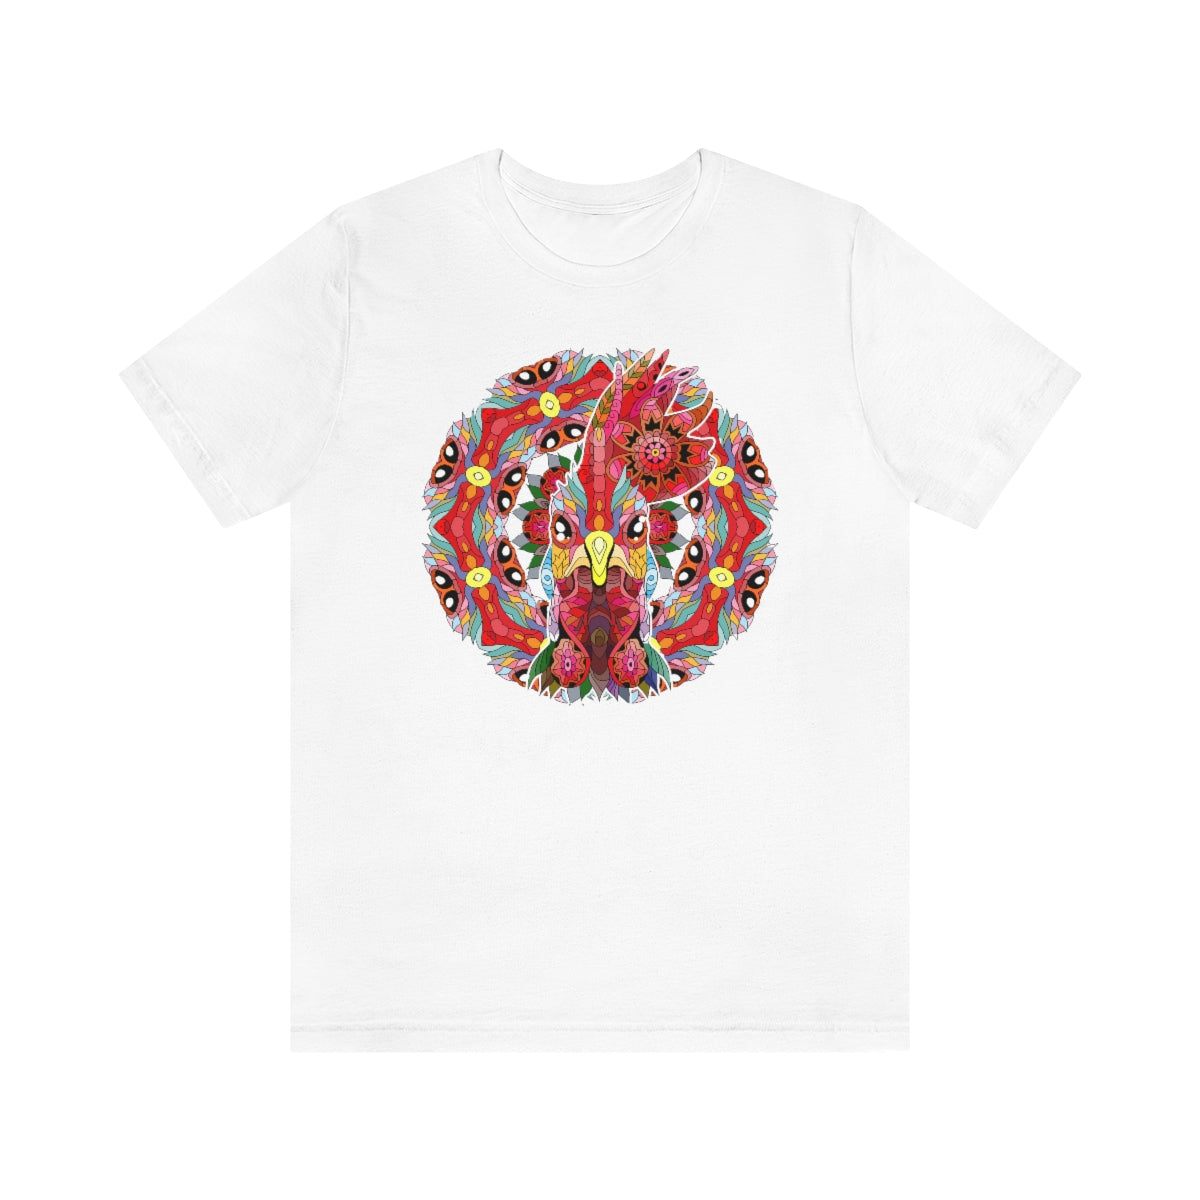 Unisex Jersey Short Sleeve Tee "Colorful rooster ornament"